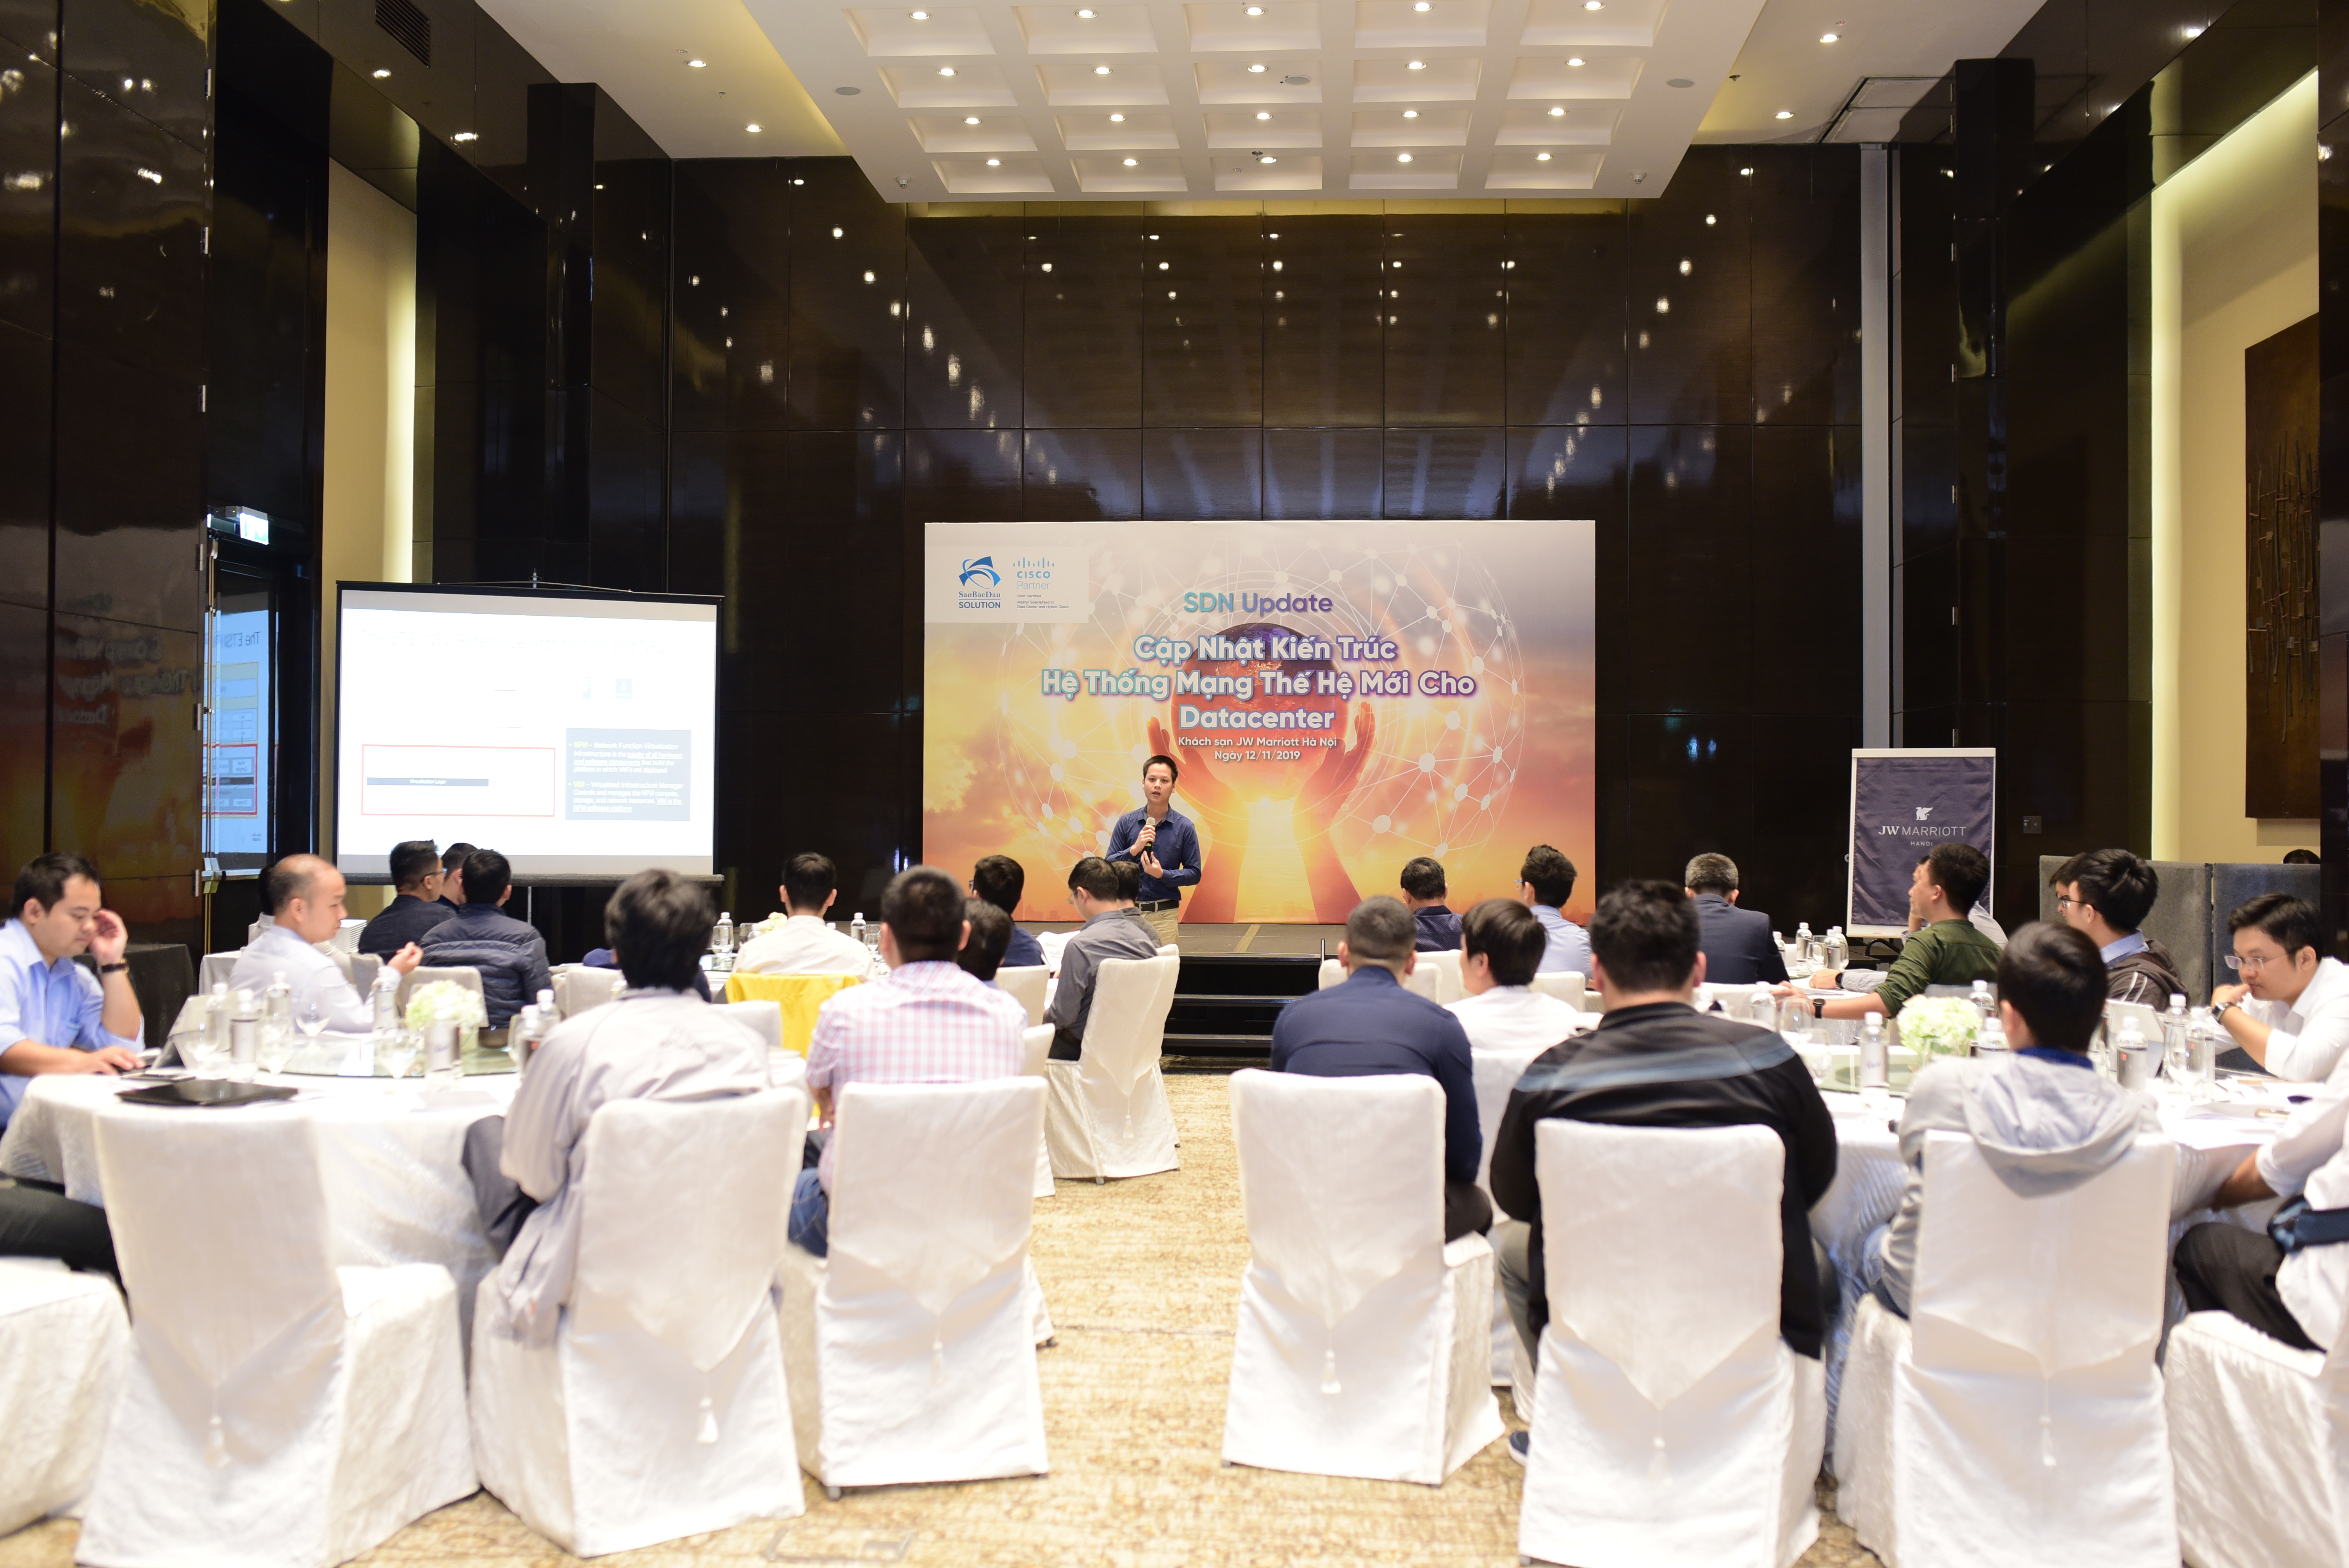 SaoBacDau Solution Joint Stock Company (JSC) successfully organized an event on Updating new generation network system architecture for Data center